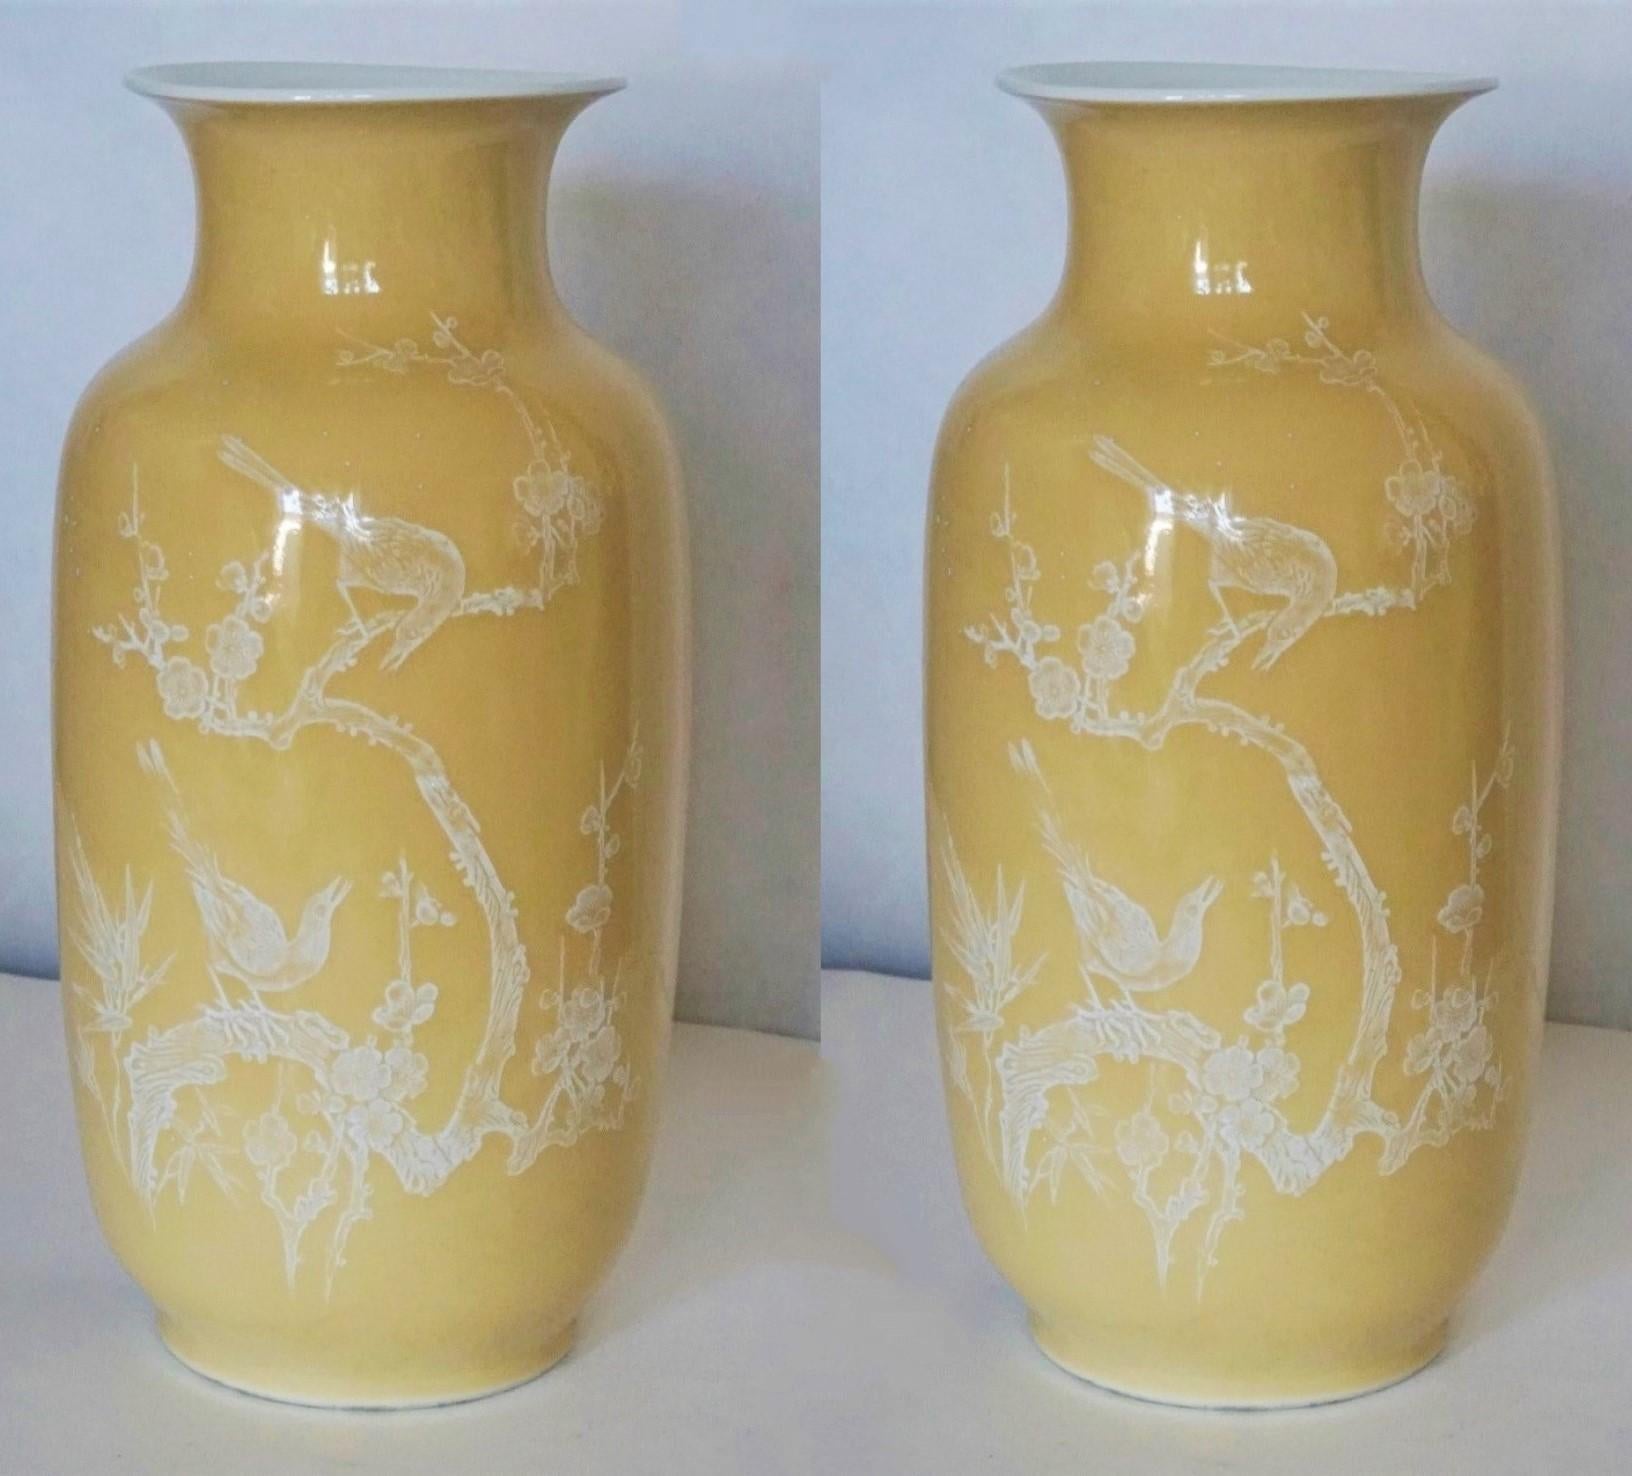 A pair of large, fine Chinese porcelain yellow-ground vases decorated with hand painted birds and floral motifs on both sides, China, early 20th century. Each vase marked at the bottom.
Condition: Both vases in fine original condition, some wear, no